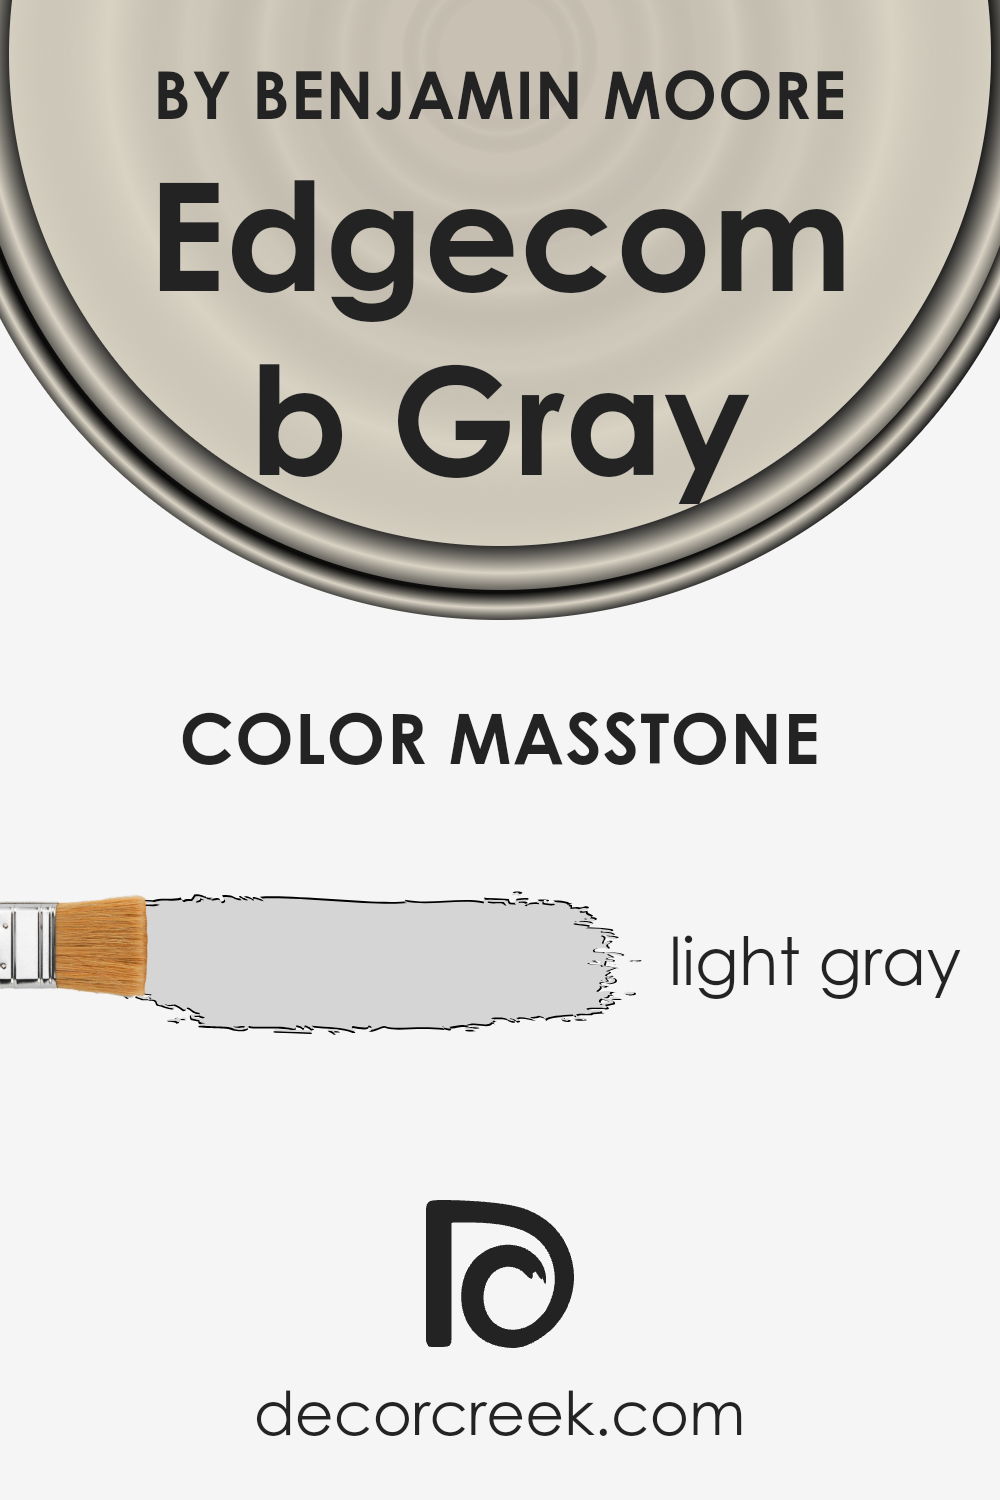 what_is_the_masstone_of_edgecomb_gray_hc_173